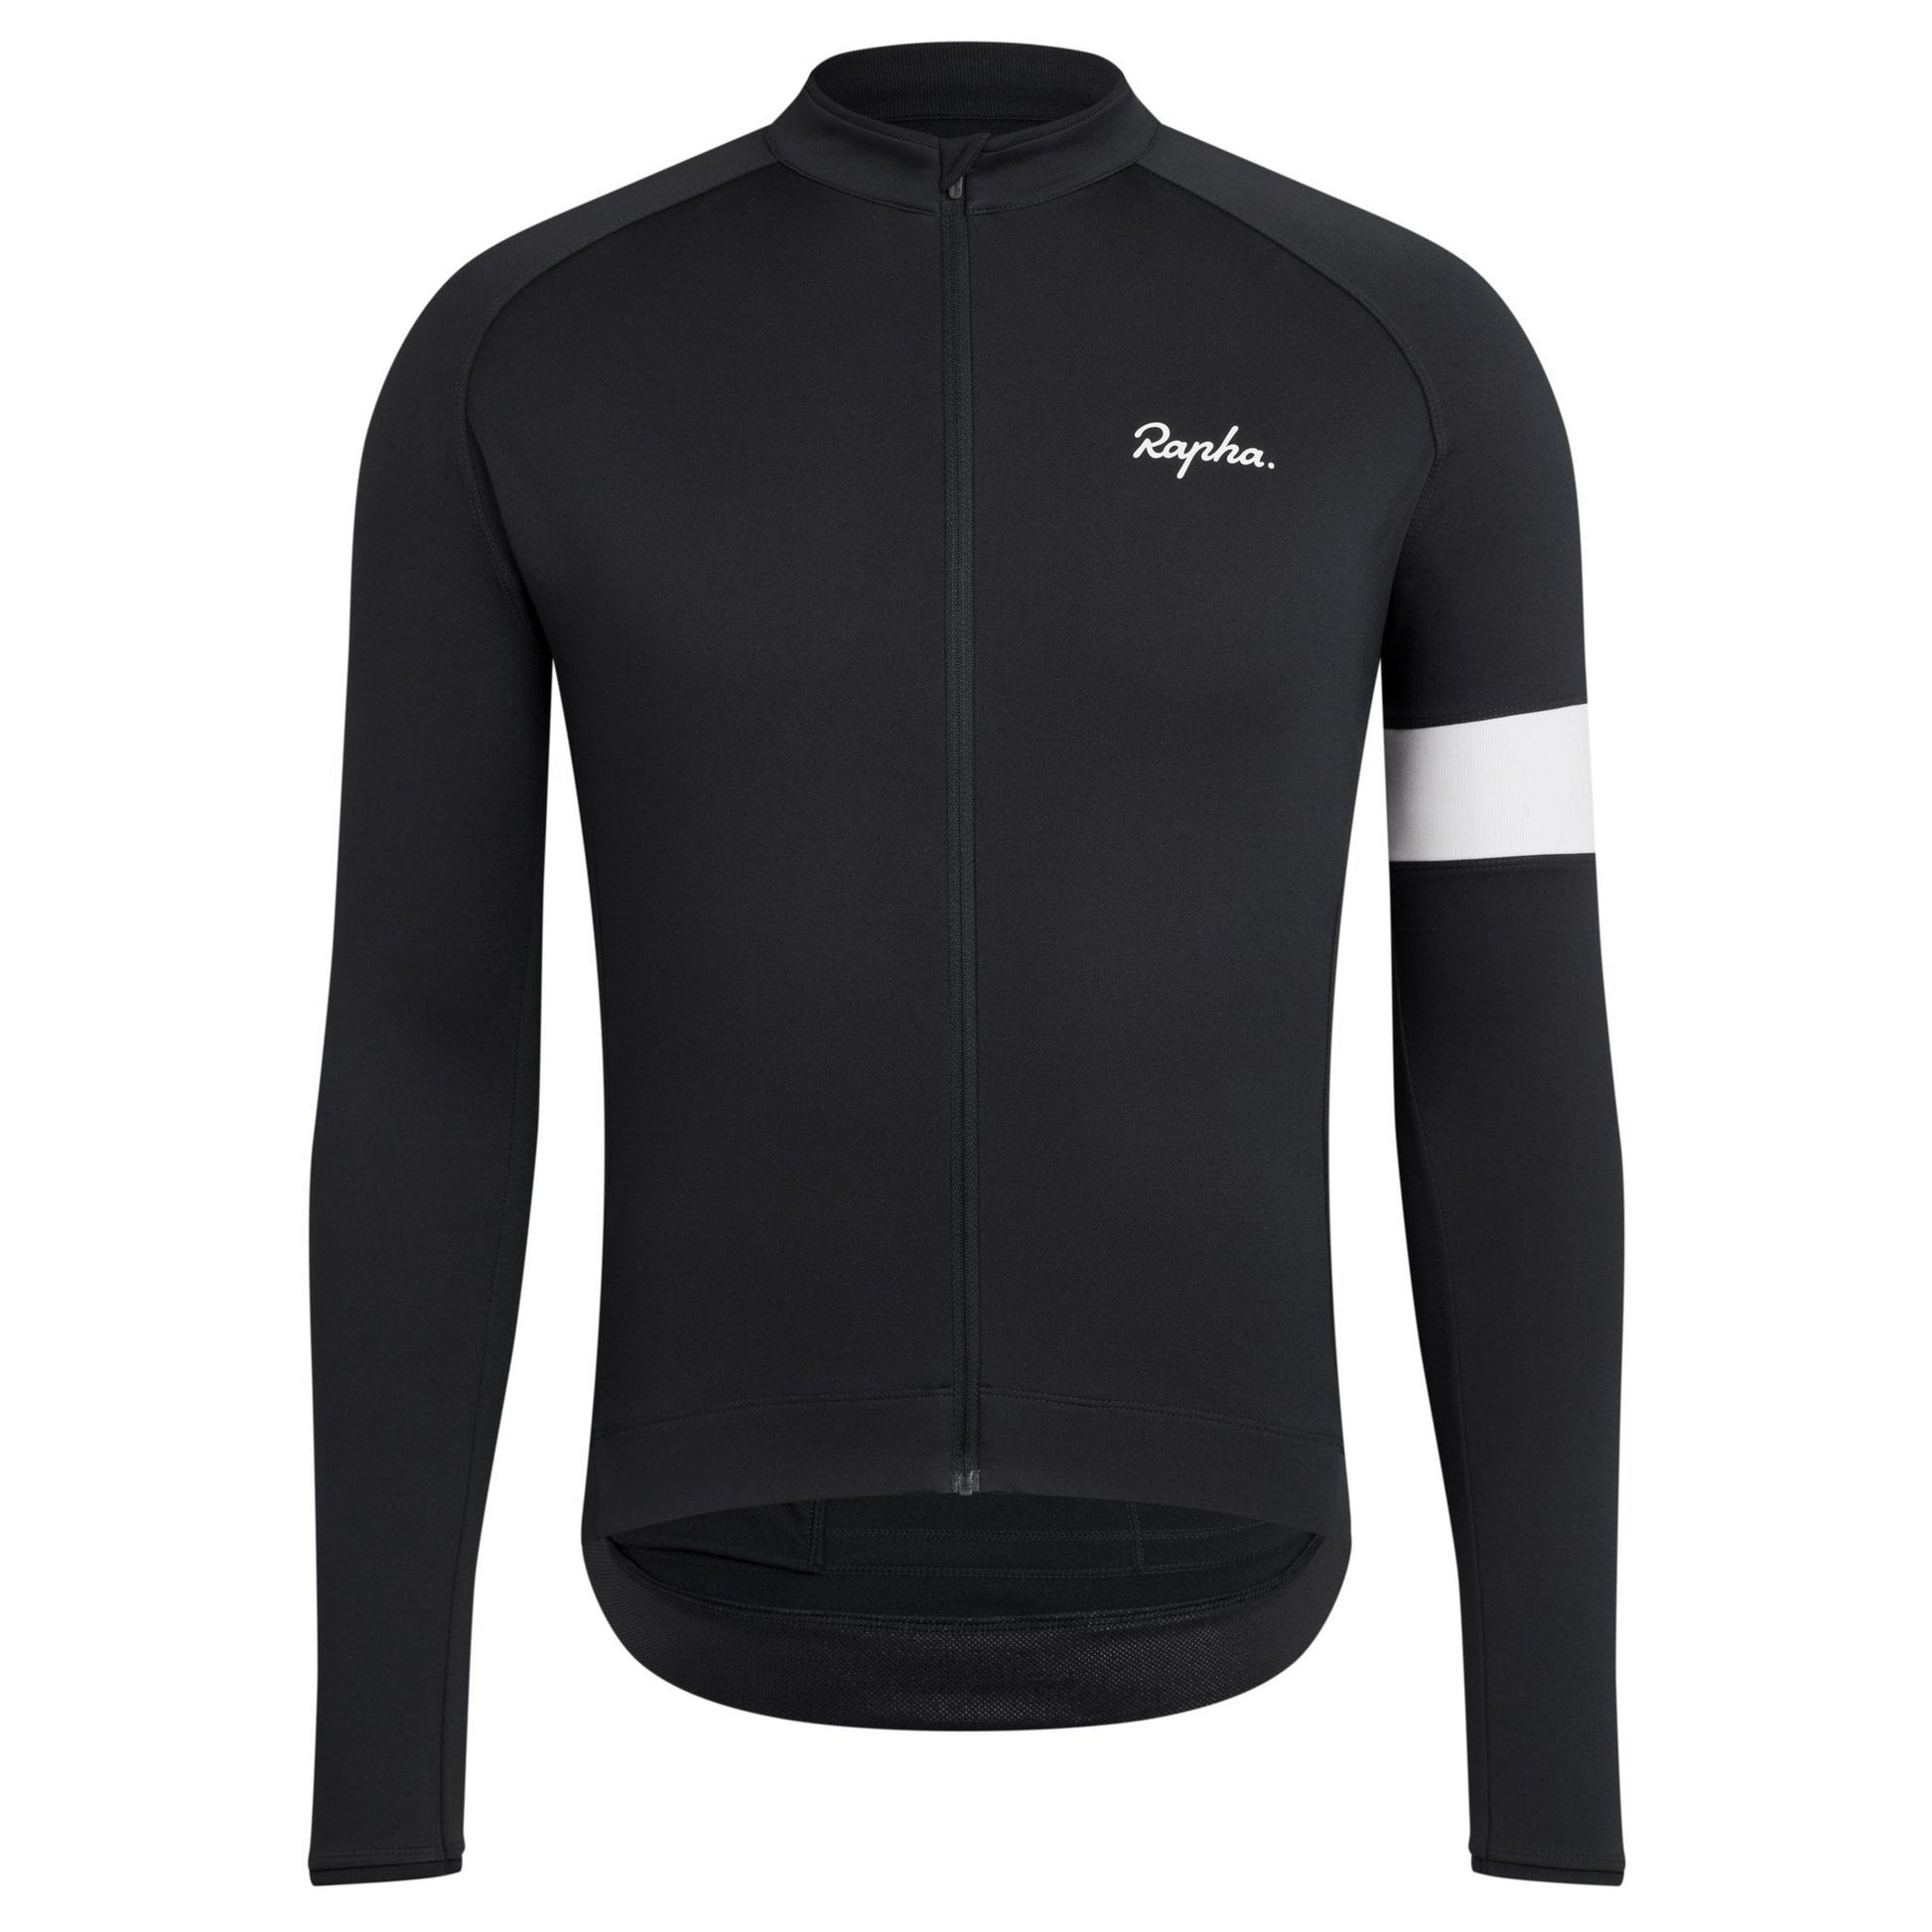 Rapha Men's Long Sleeve Core Jersey - Black buy online at Woolys Wheels bicycle shop Sydney with free delivery